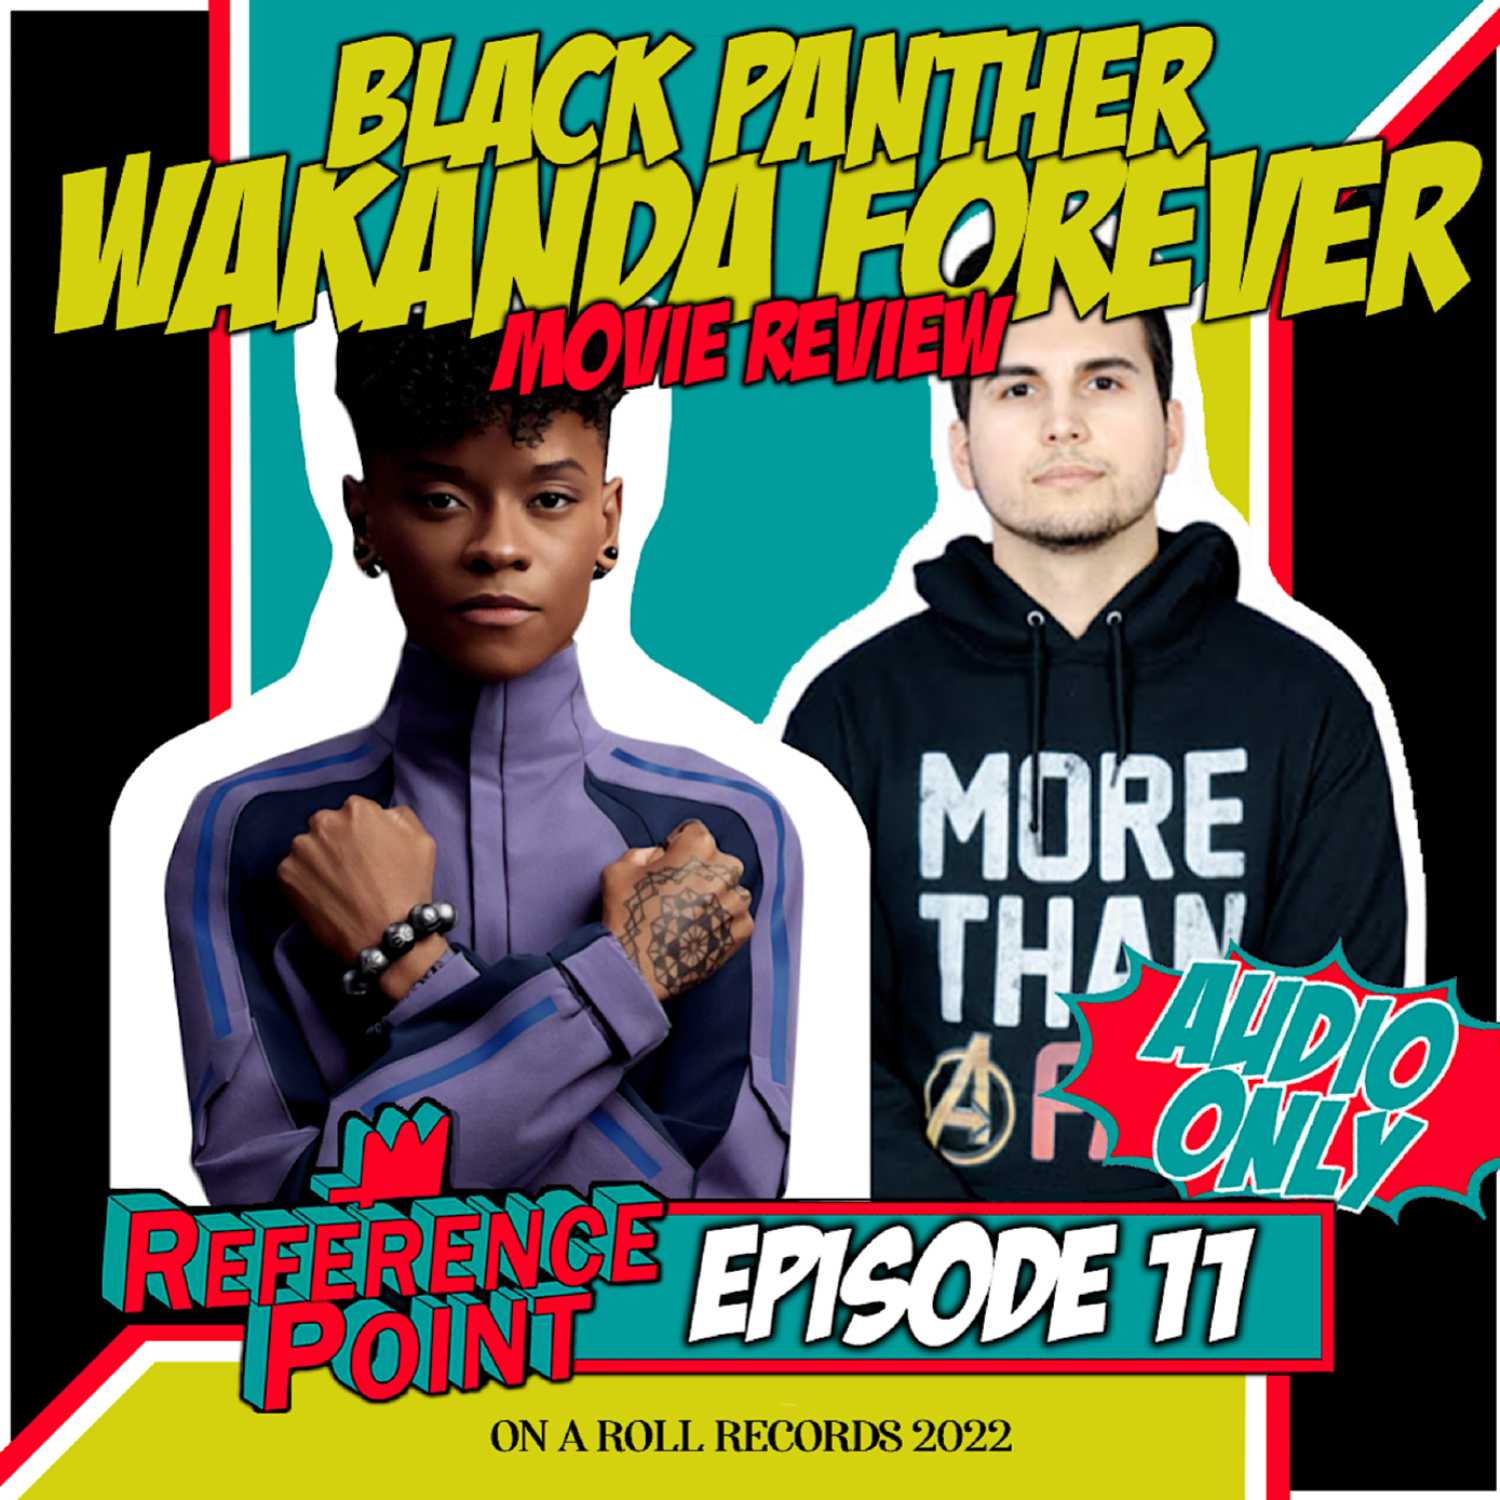 REFERENCE POINT - Episode 11 : BLACK PANTHER: WAKANDA FOREVER (Movie Review)